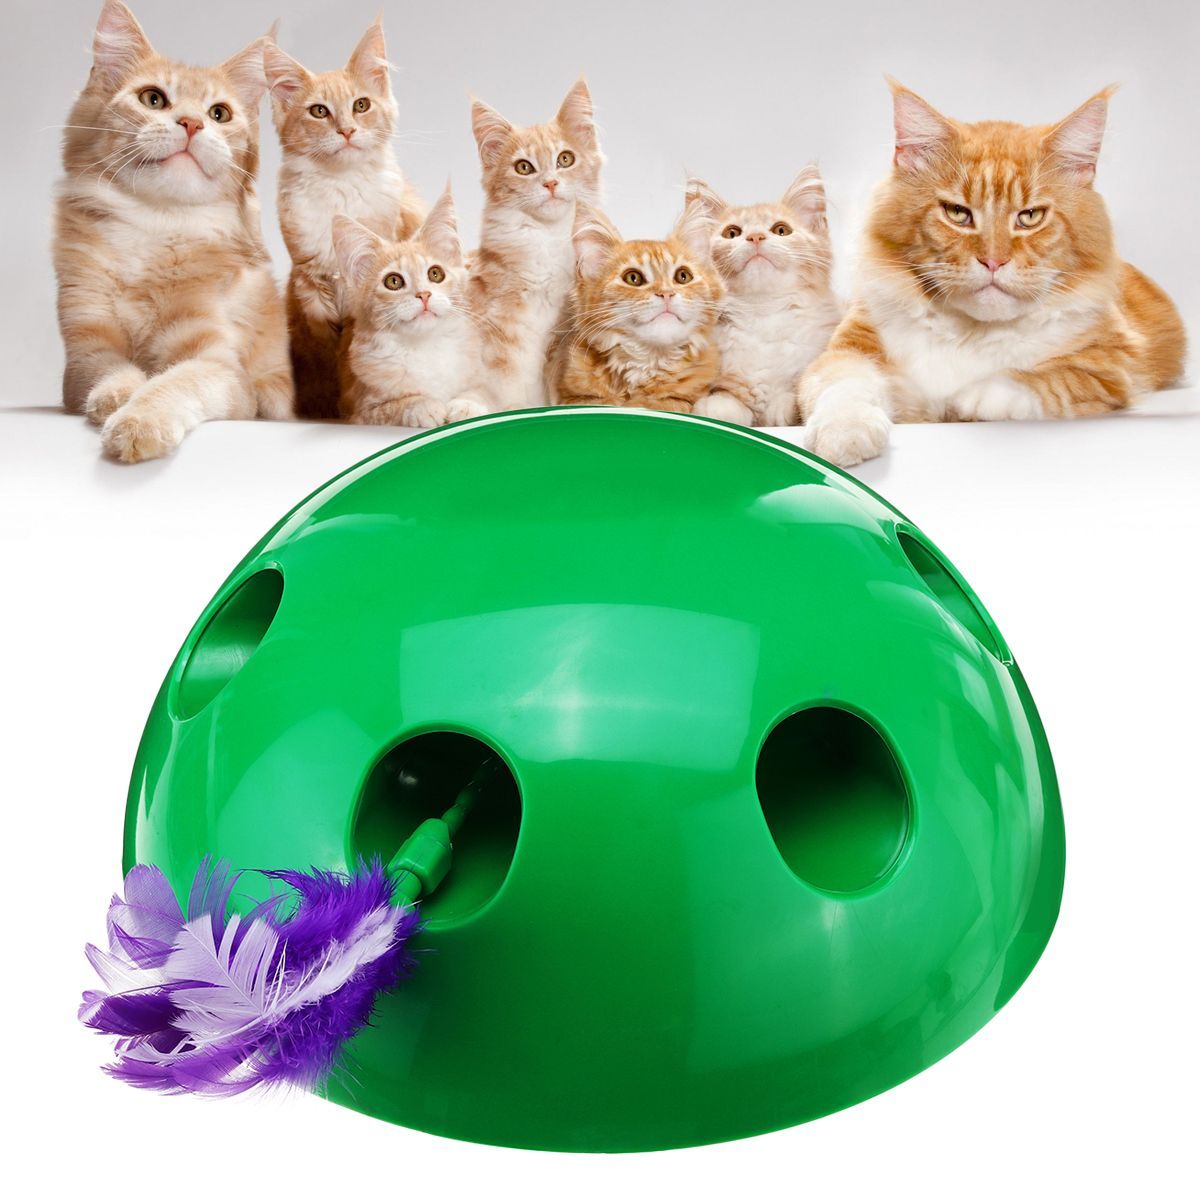 New-Interactive-Motion-Cat-Toy-Mouse-Tease-Electronic-Fun-Pet-LOT-Training-Toys-1592571